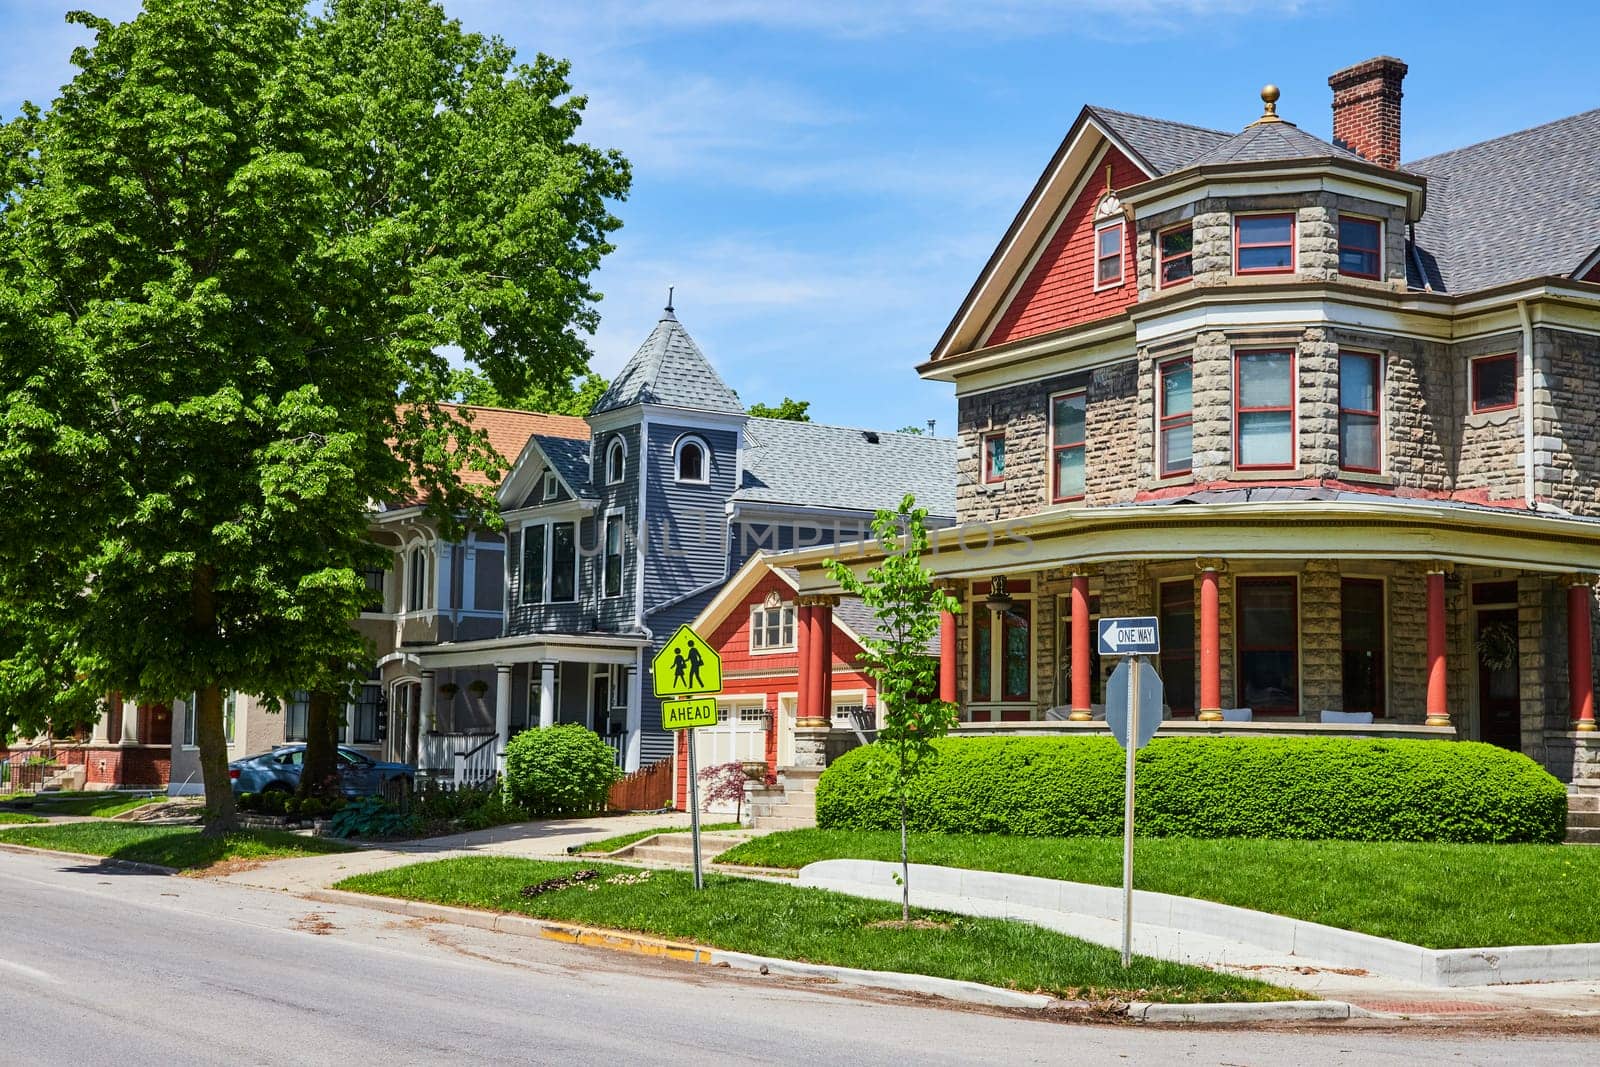 Charming historic homes line a serene street in Fort Wayne, showcasing diverse architectural elegance under clear skies.